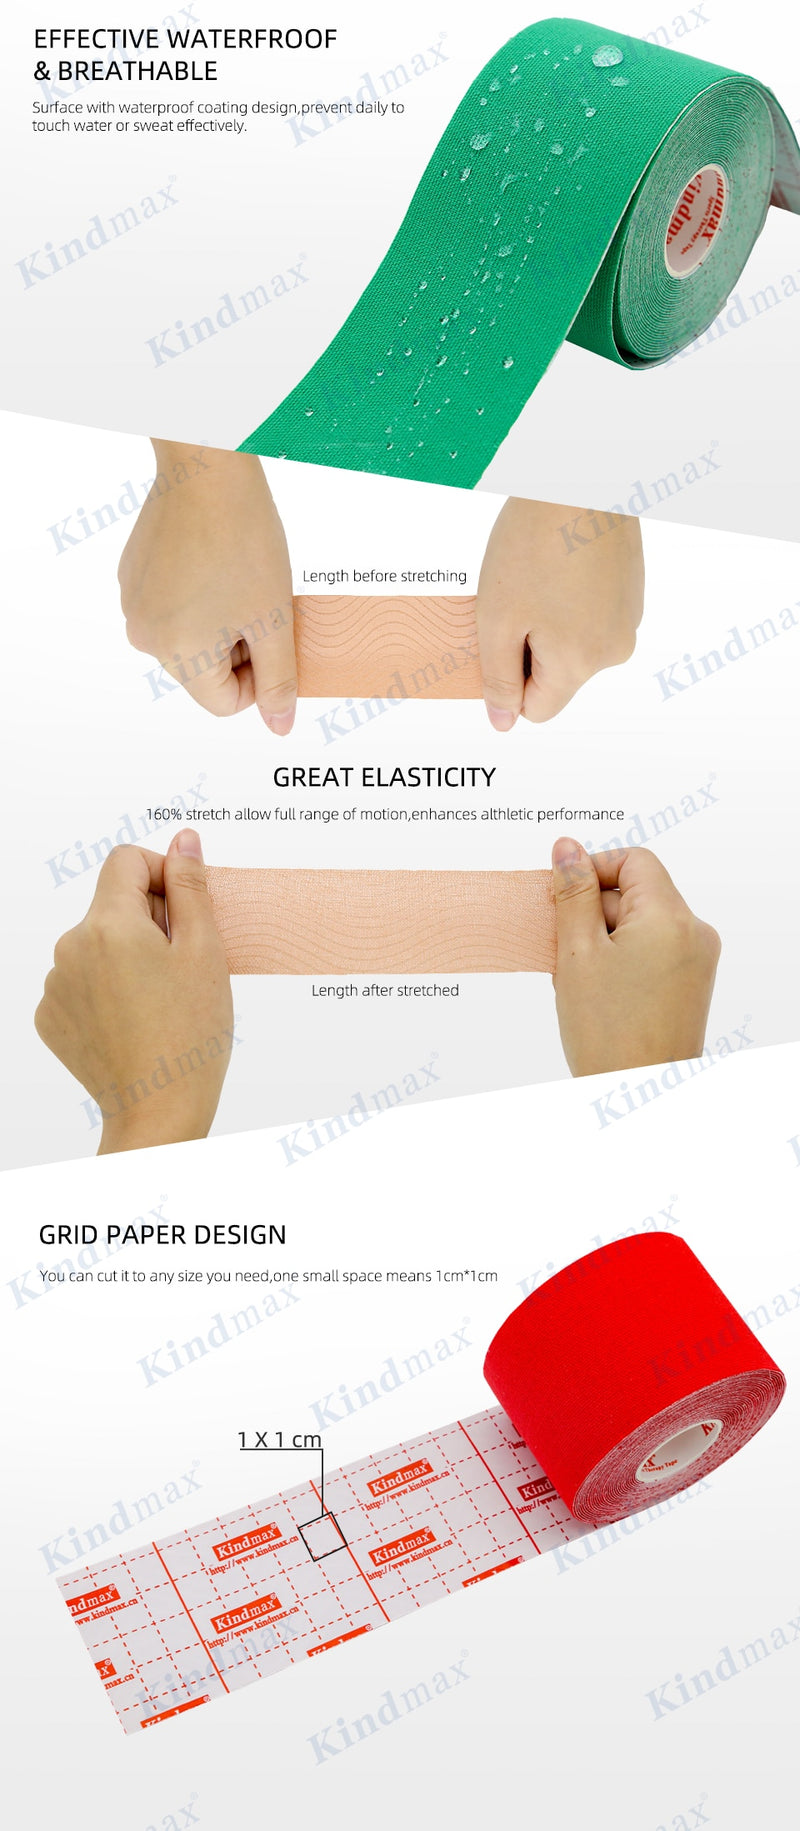 5 Size Kindmax 100% Cotton Elastic Kinesiology Tape Sport Physiotherapy Recovery Bandage for Running Knee Muscle Protector - KiwisLove